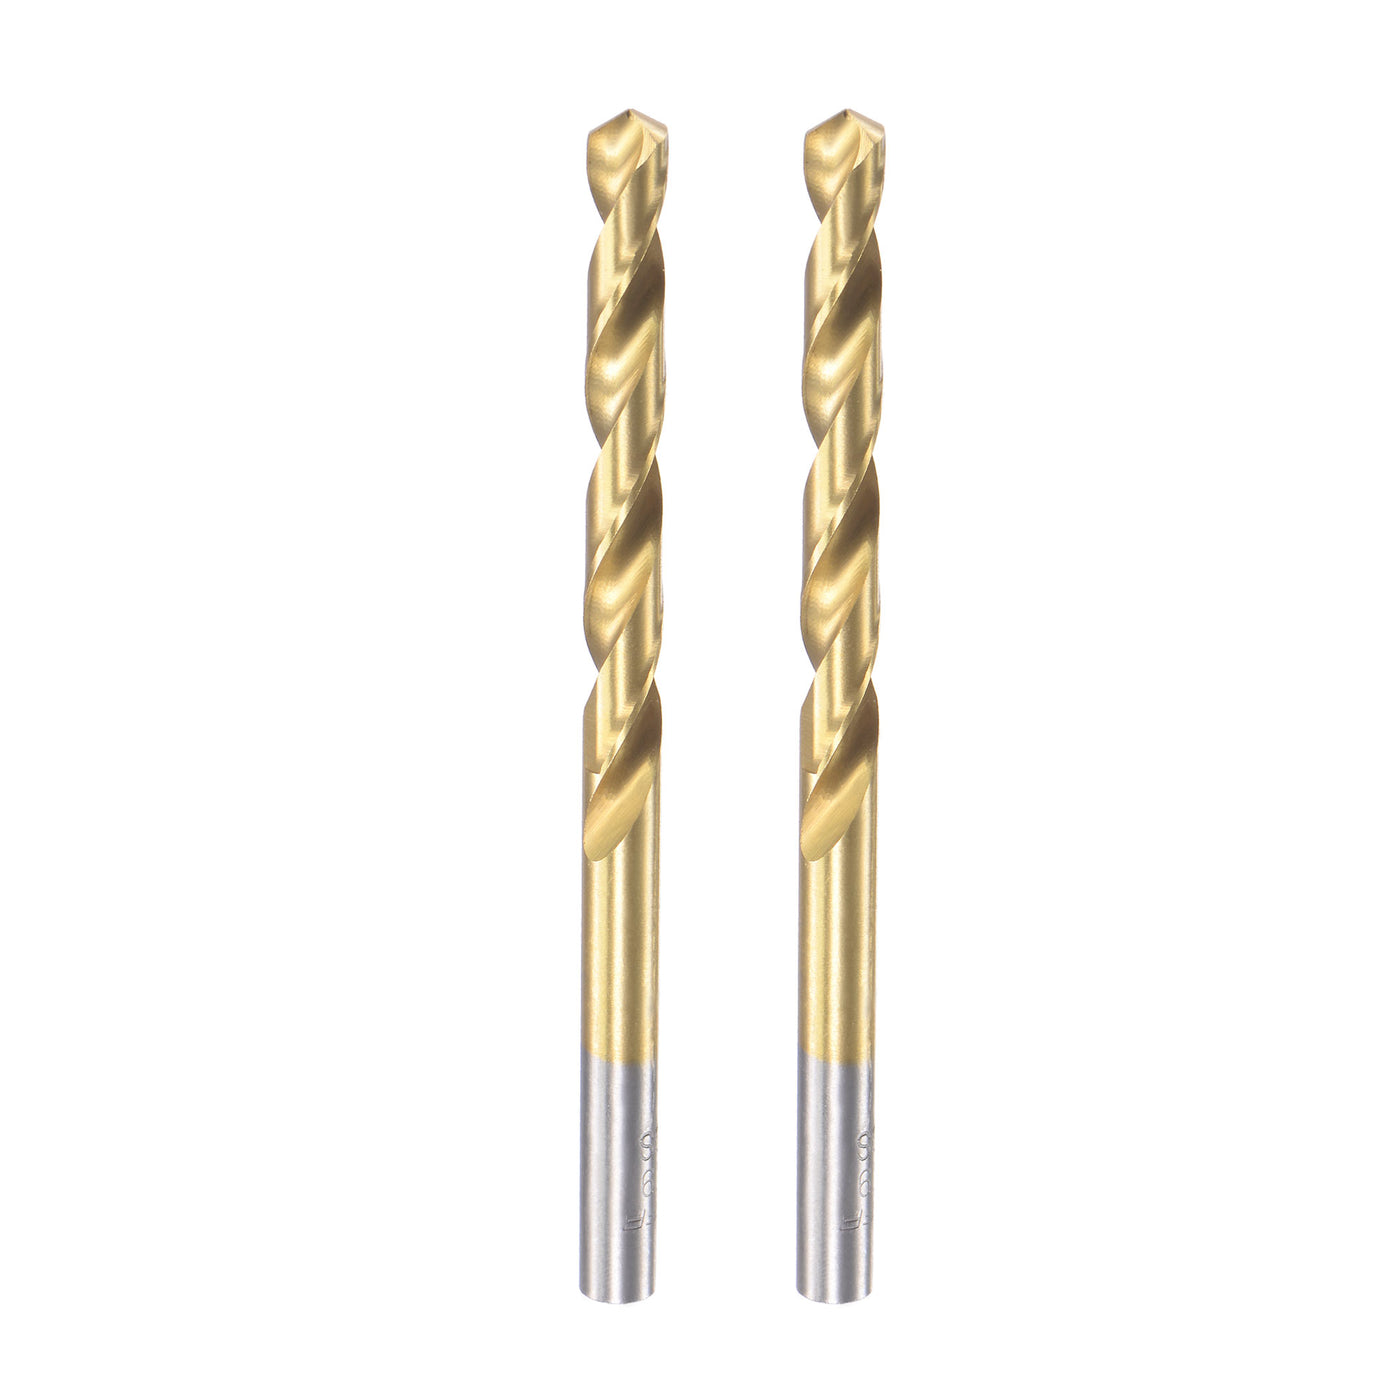 uxcell Uxcell High Speed Steel Twist Drill Bit 5.9mm Fully Ground Titanium Coated 2 Pcs